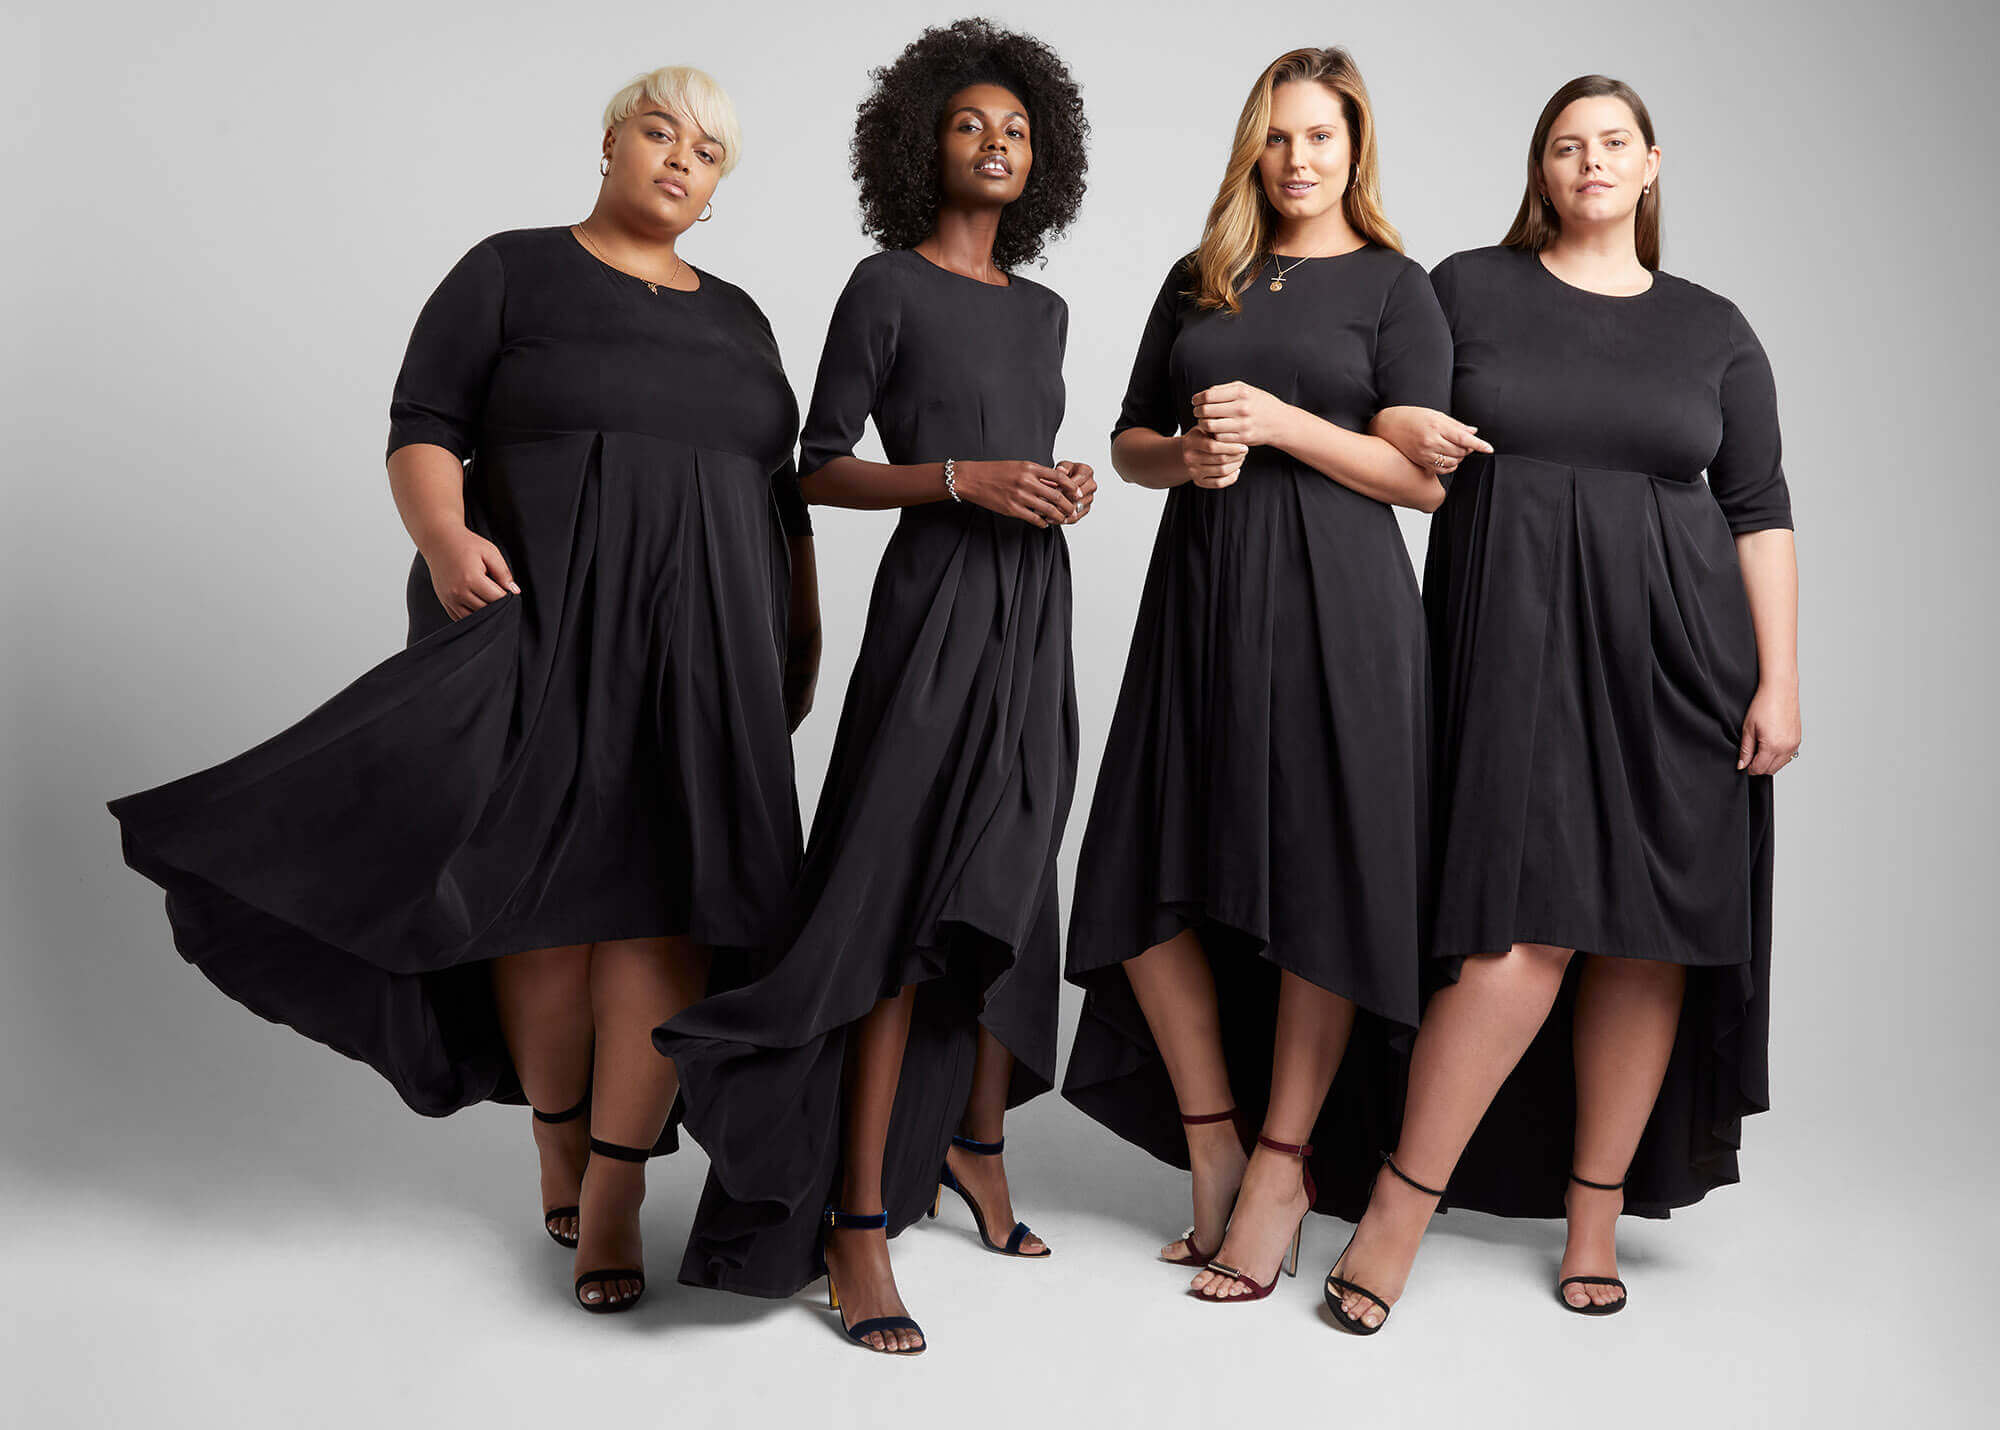 Universal Standard plussize saviours or sellouts? Positively Virtual